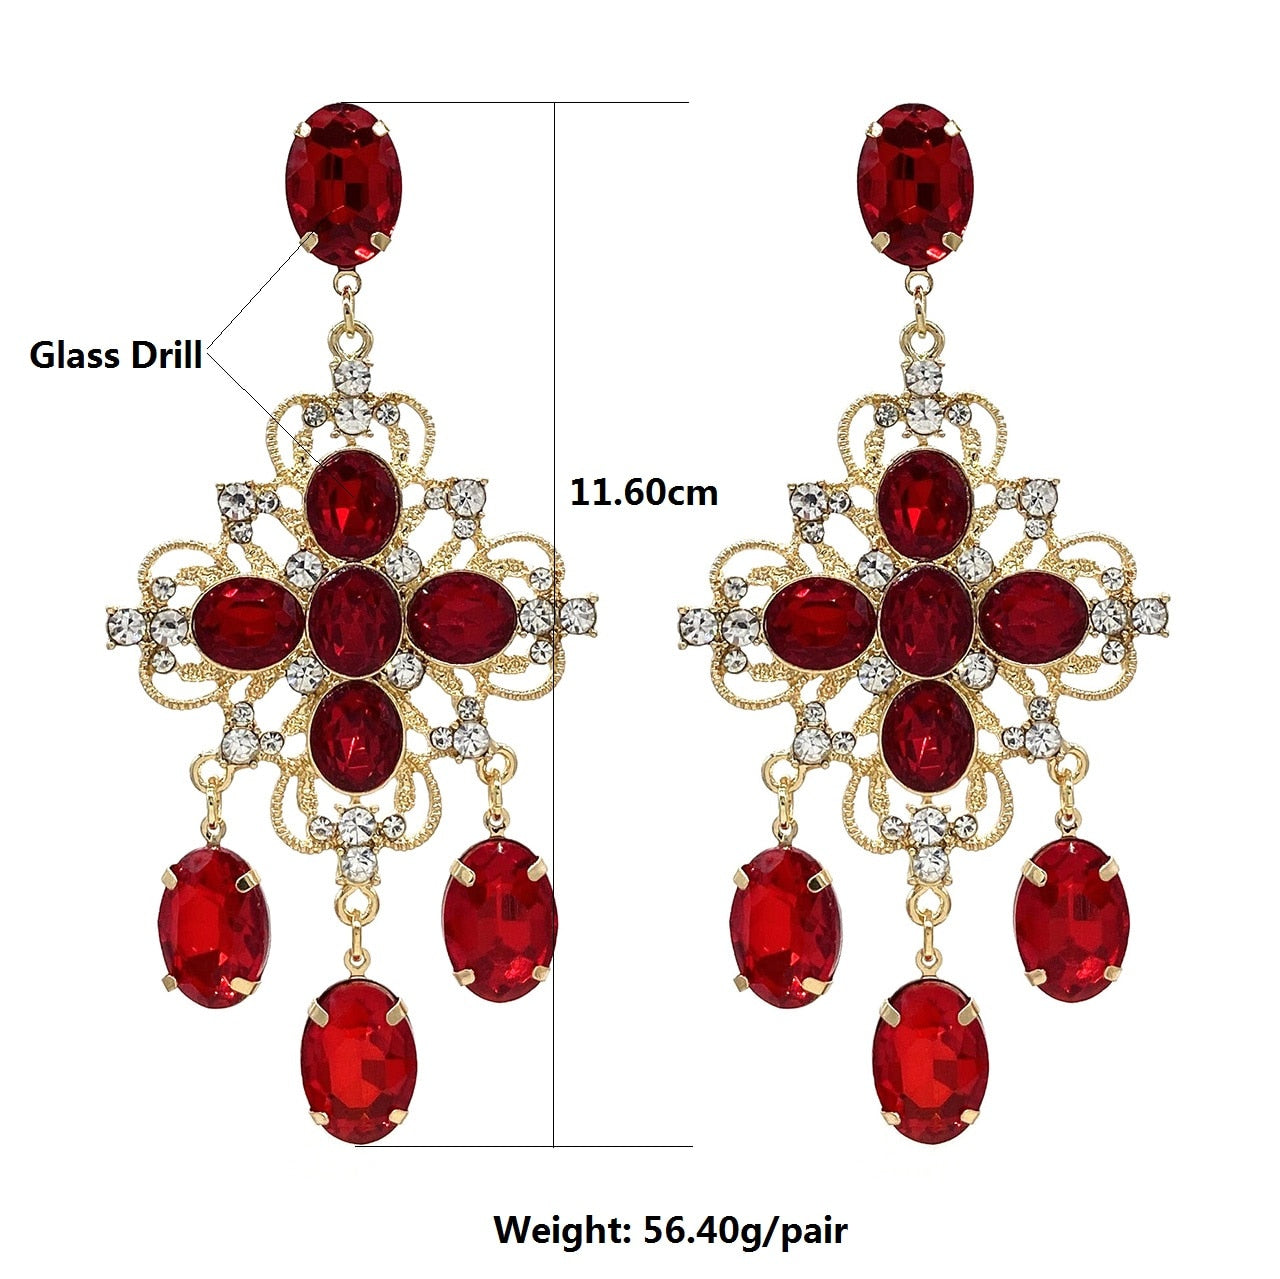 New Glass Drill Statement Big Drop Luxury Earrings For Woman